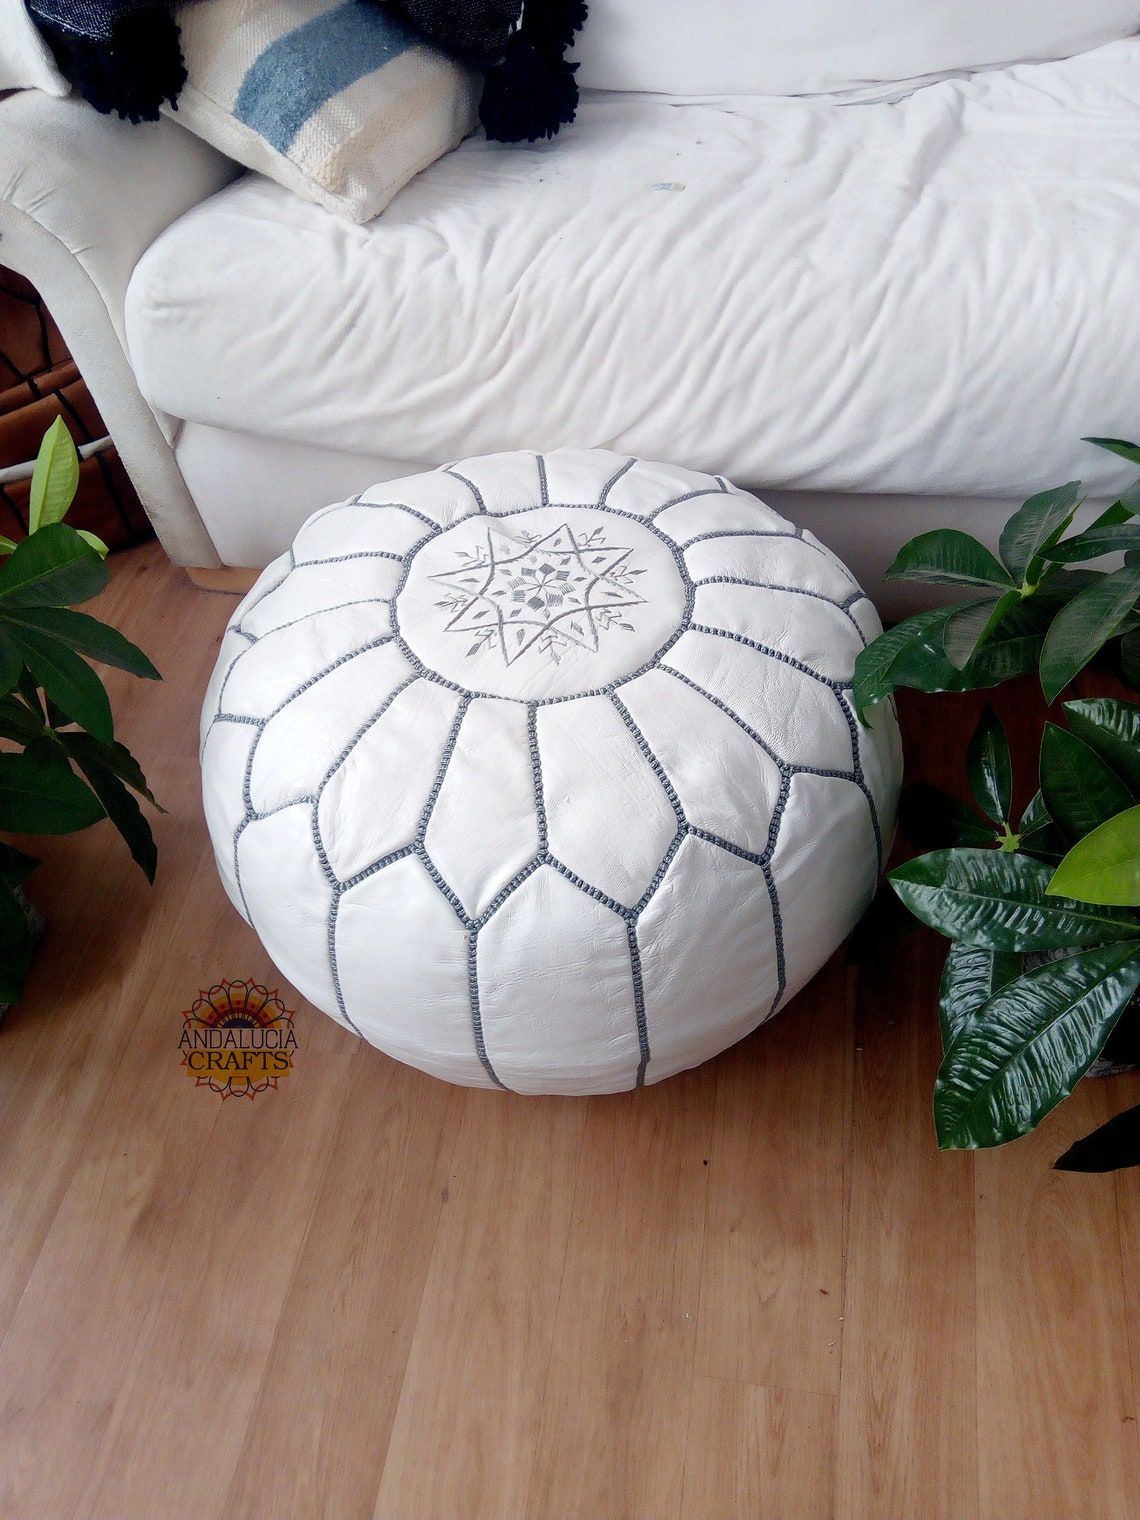 White Moroccan Pouf With Grey Stitching Leather Pouf Ottoman | Etsy Throughout White And Light Gray Cylinder Pouf Ottomans (View 6 of 20)